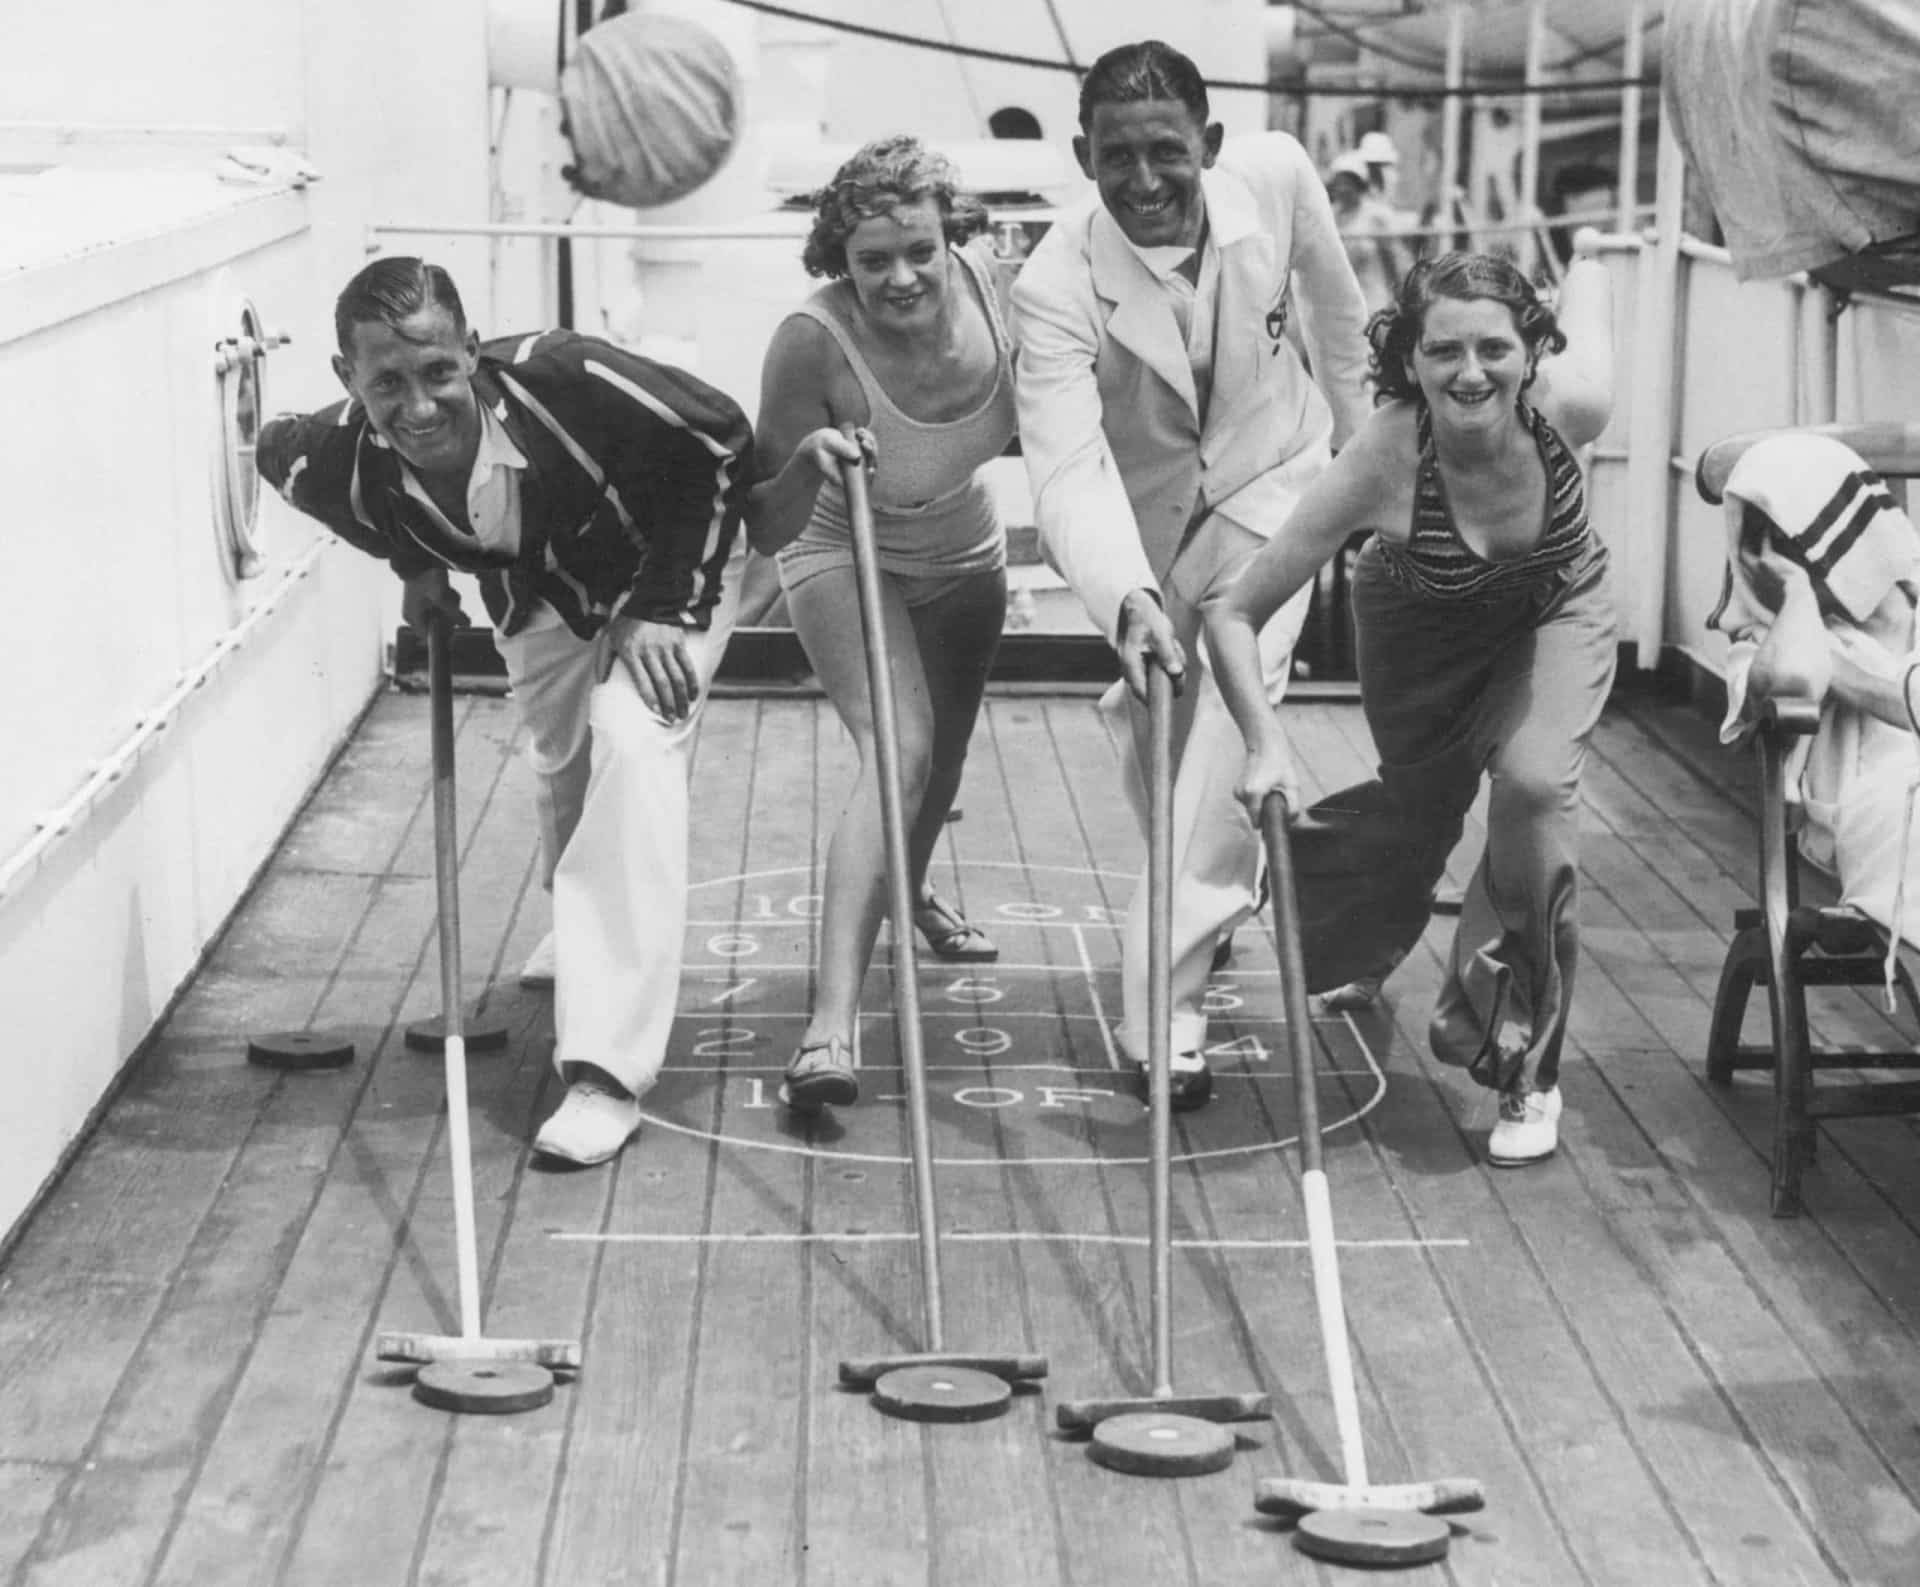 <p>Throughout the 1920s and 1930s, cruise line companies continued to prosper, with destinations more global and defined as "pleasure cruises"—a clear indicator that more and more people were recognizing a cruise as an affordable leisure option.</p><p><a href="https://www.msn.com/en-za/community/channel/vid-7xx8mnucu55yw63we9va2gwr7uihbxwc68fxqp25x6tg4ftibpra?cvid=94631541bc0f4f89bfd59158d696ad7e">Follow us and access great exclusive content every day</a></p>